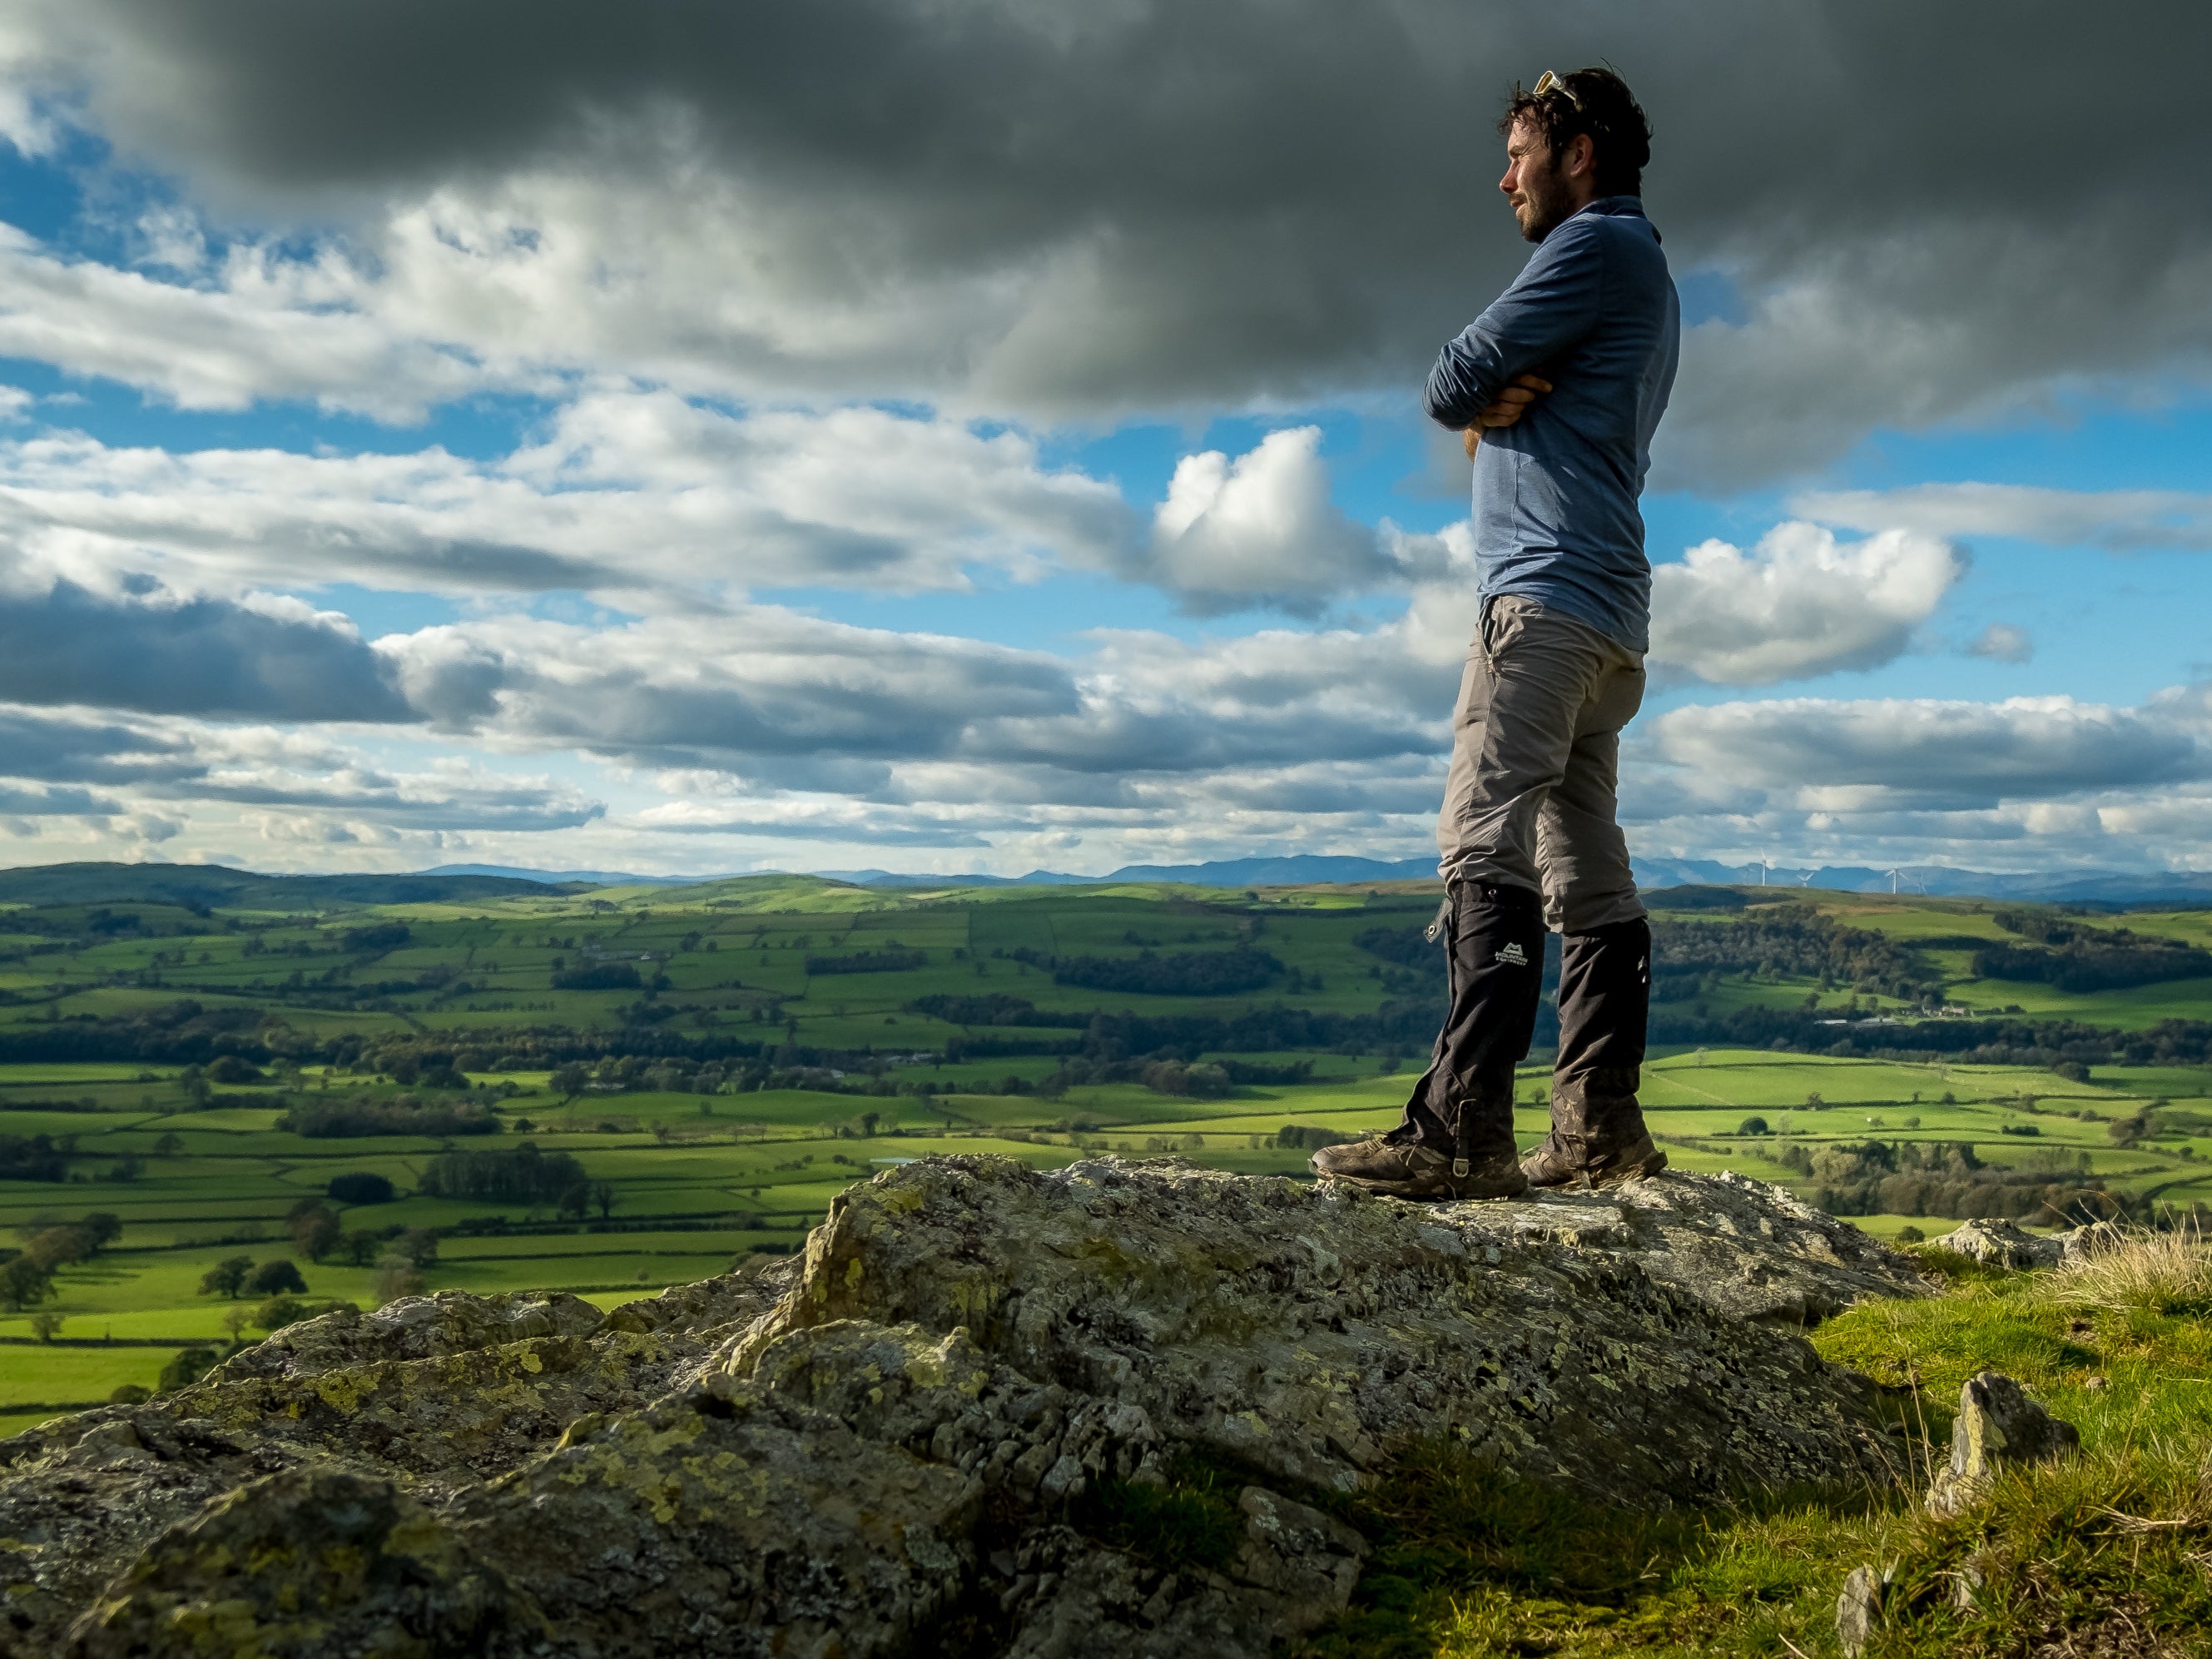 Peter hikes in the Yorkshire Dales during his first microchallenge